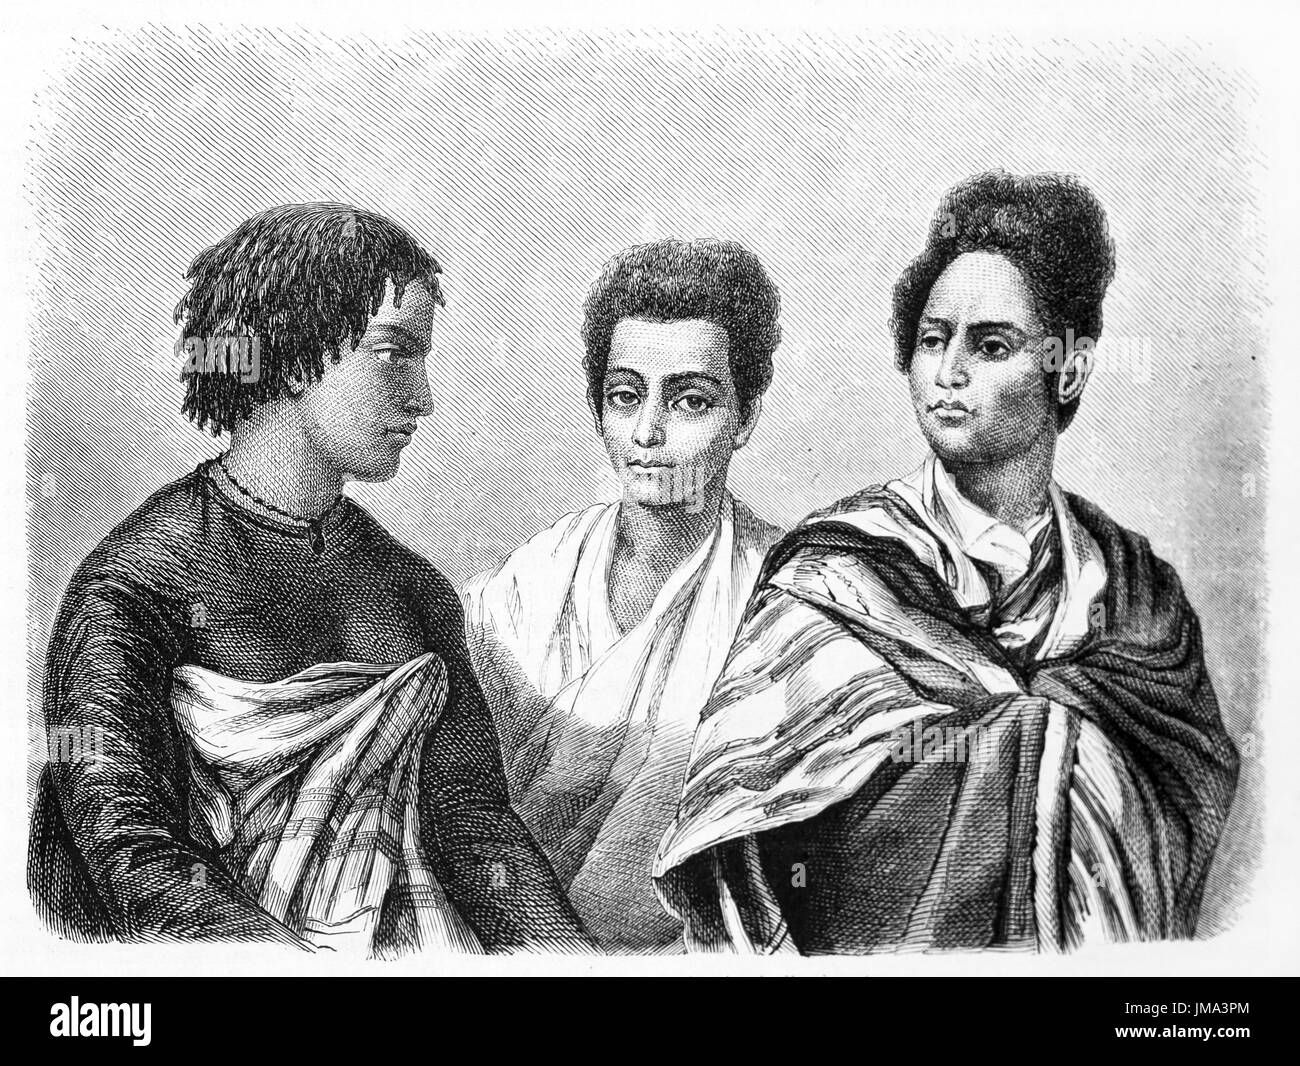 Old engraved illustration of Malagasy people. Created by Bérard, published on Le Tour du Monde, Paris, 1861 Stock Photo